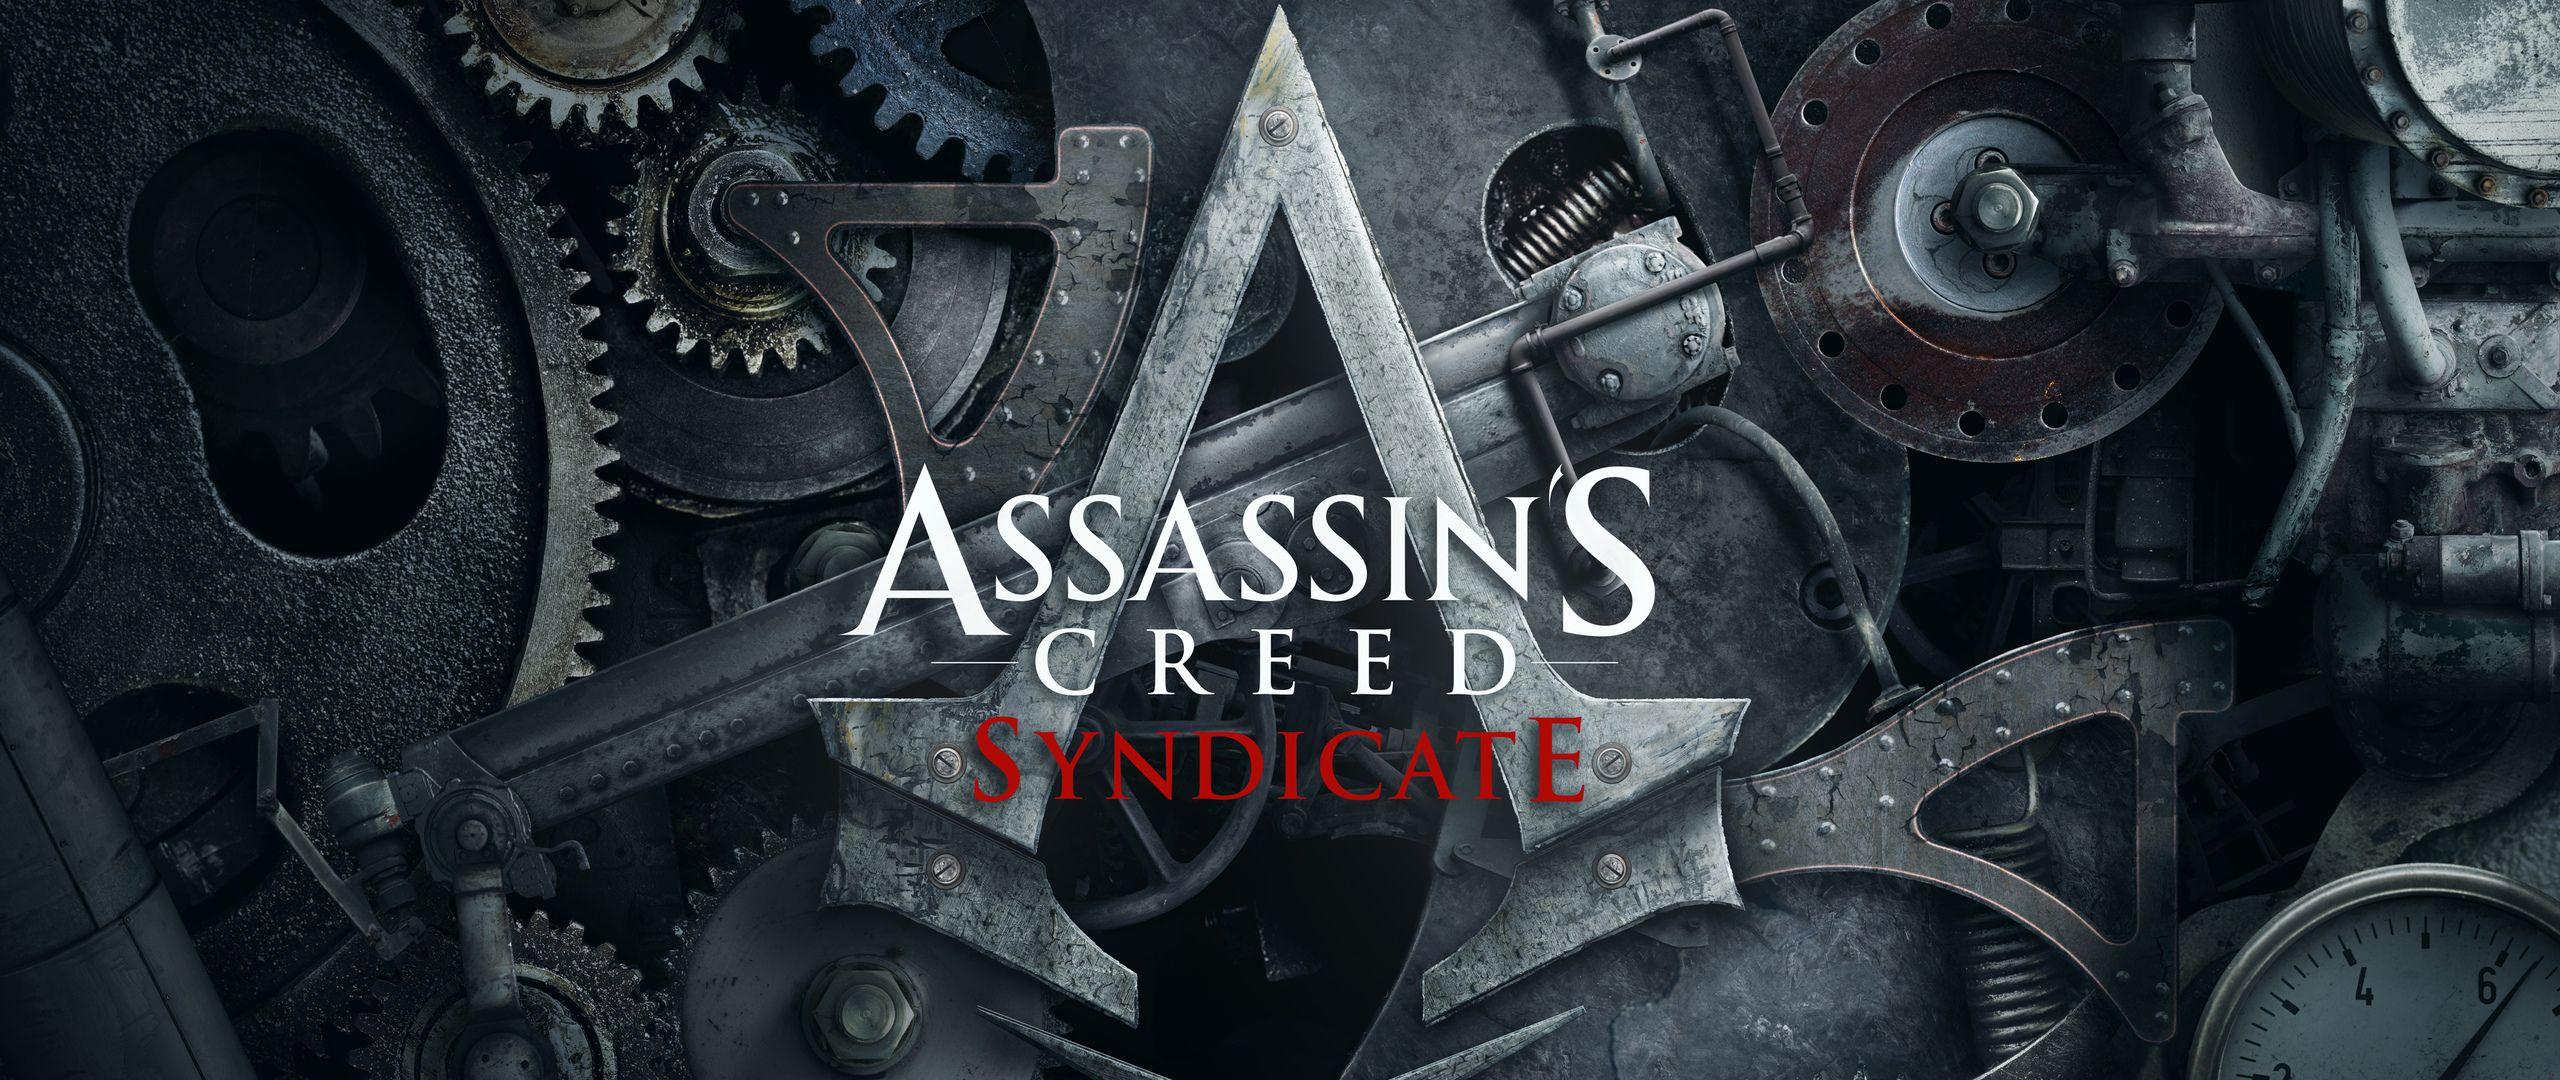 Giới thiệu về game Assassin’s Creed Syndicate